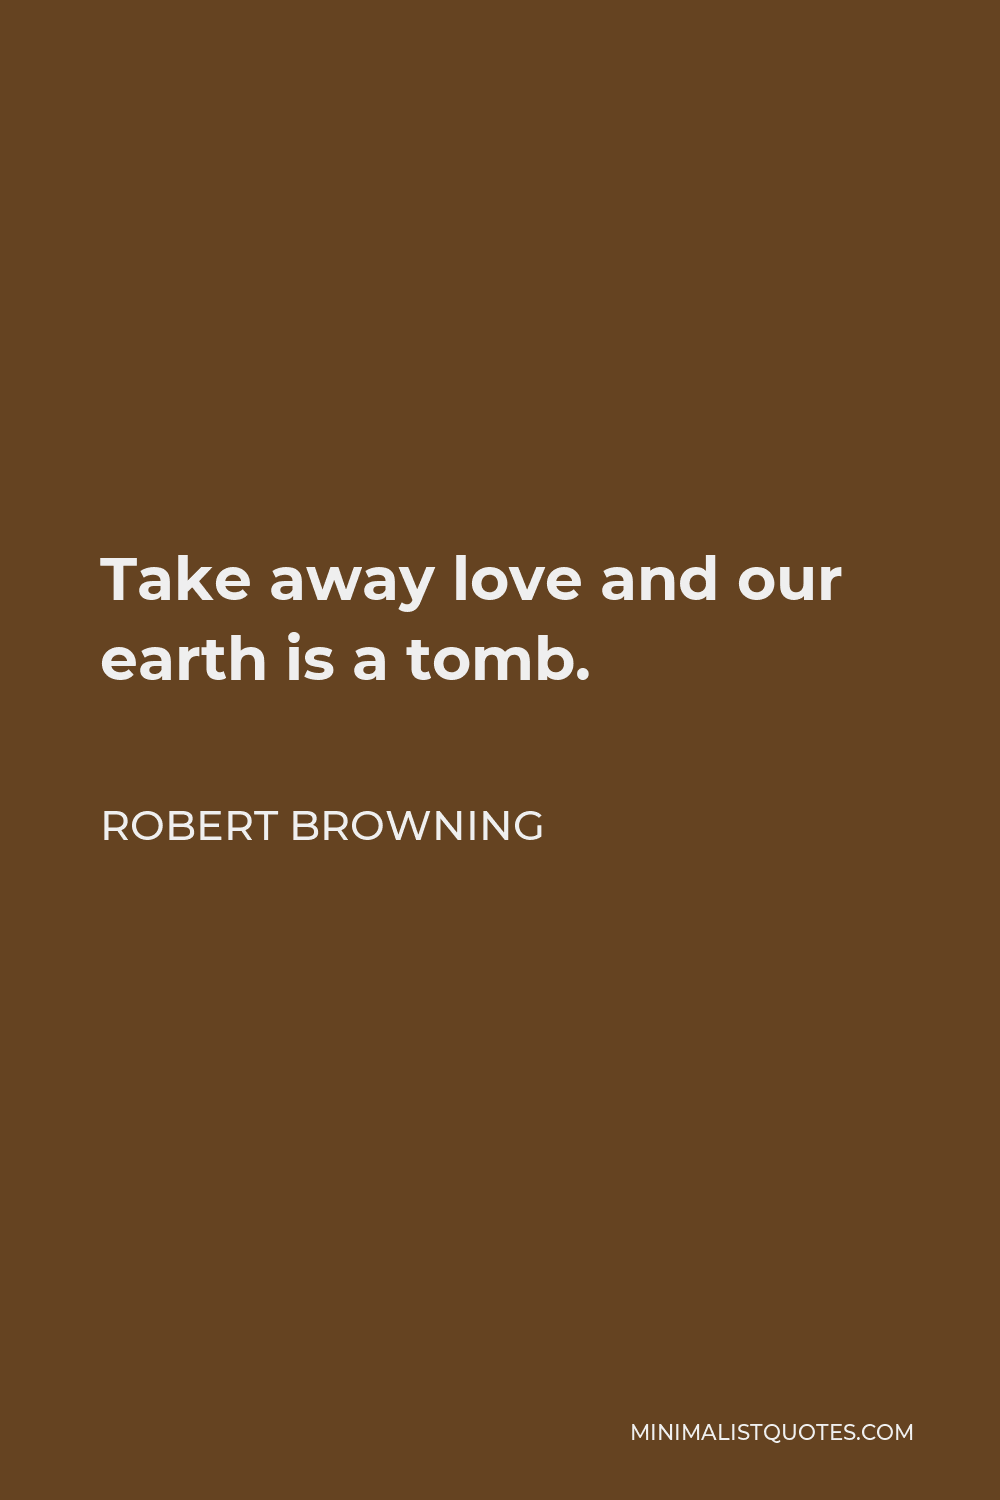 Robert Browning Quote - Take away love and our earth is a tomb.